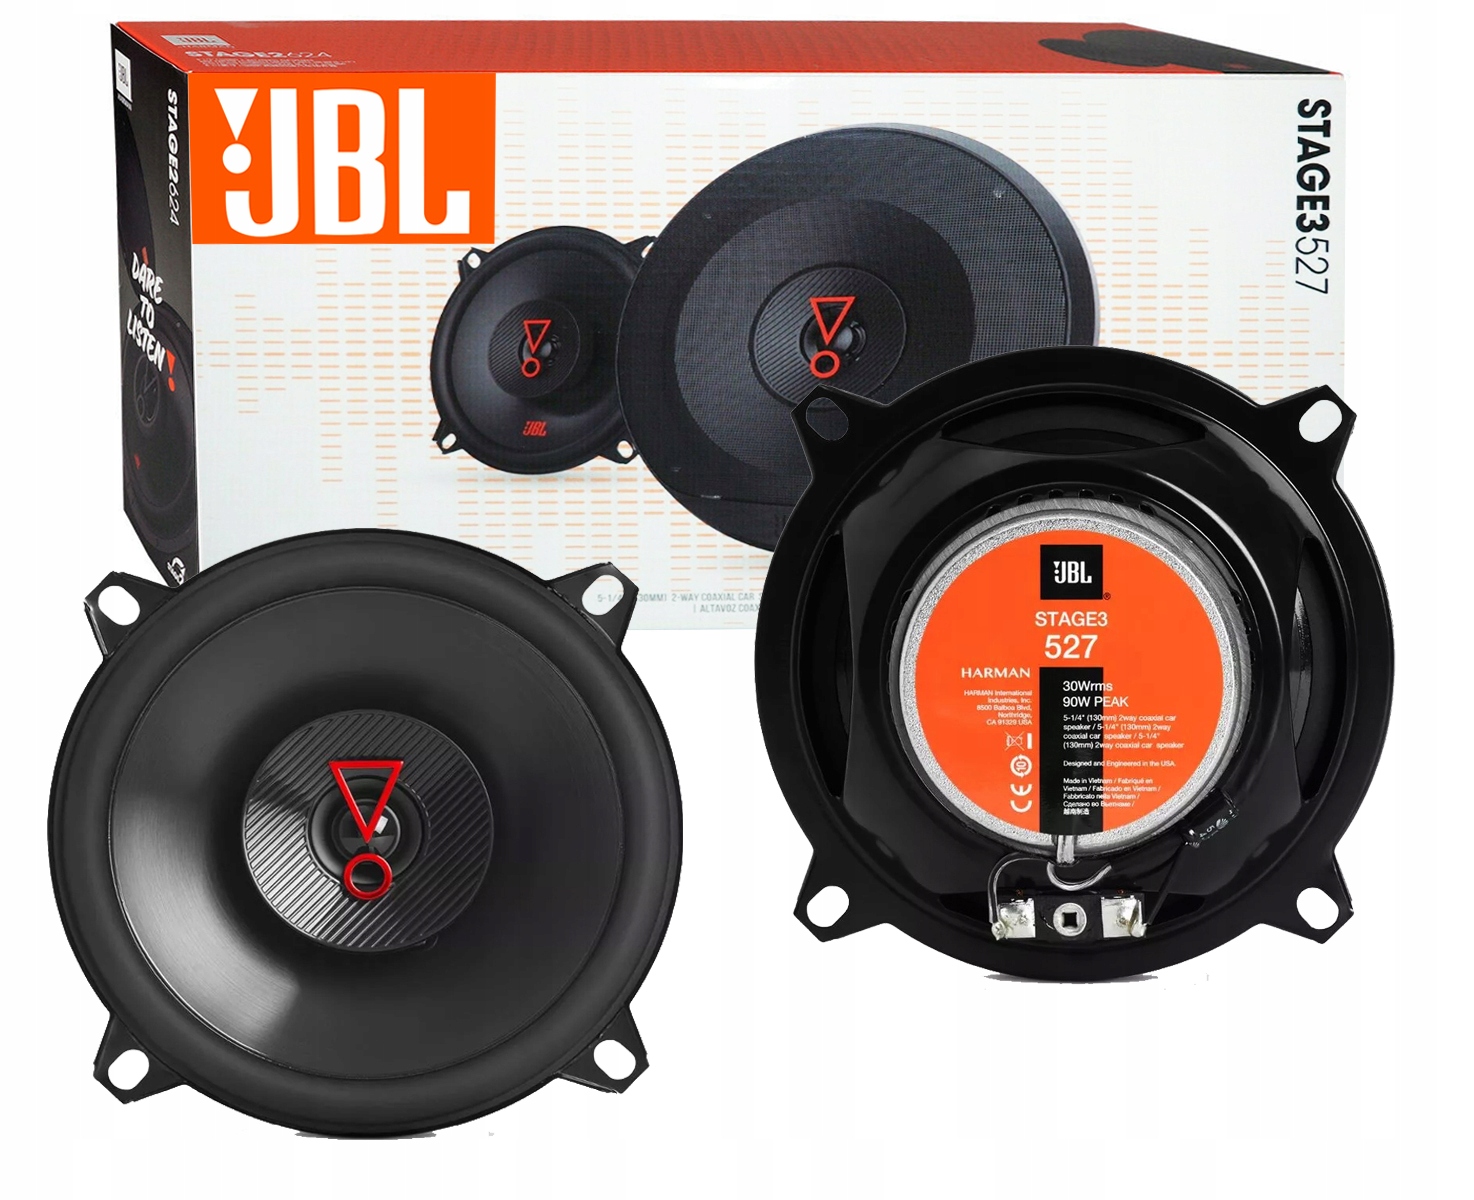 Buy JBL STAGE 3 527 SPEAKERS BMW 5 E39 E34 7 E32 E38 used from Poland